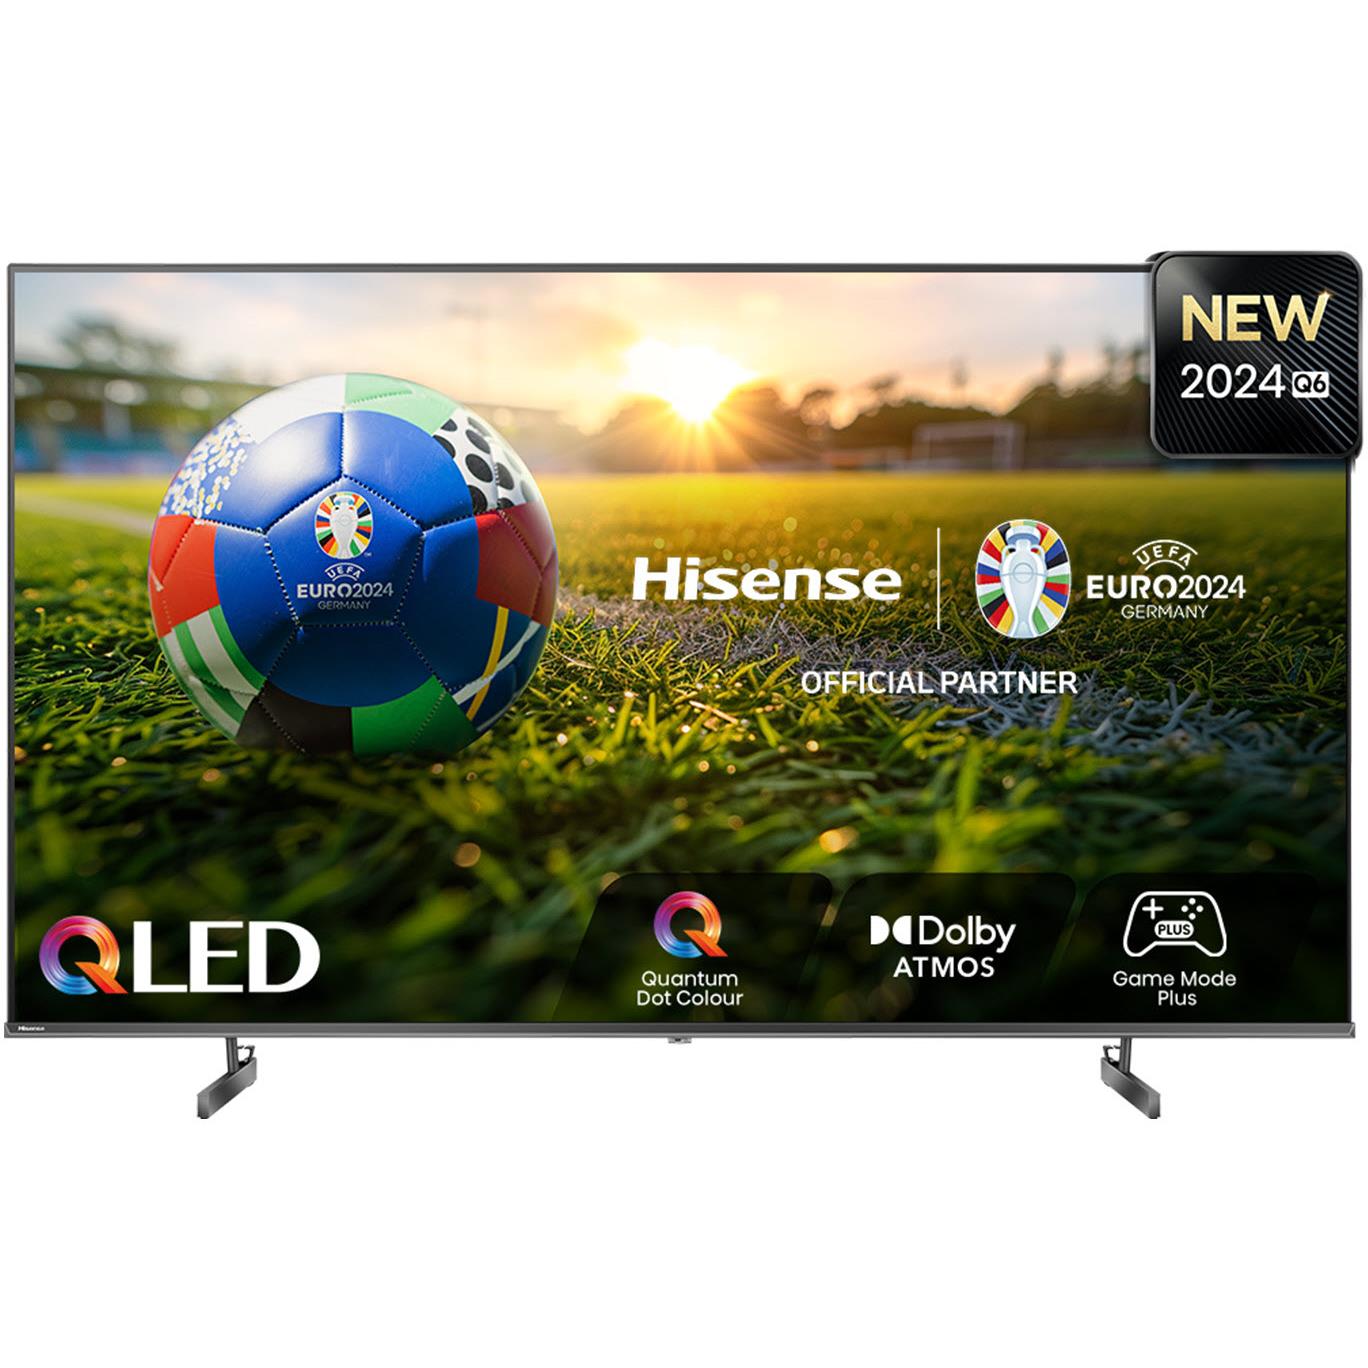 Hisense A6 Series 65 Inch Class 4k Uhd Smart Google Tv With Voice Remote Dolby Vision Hdr Dts Virtual X Sports Game Modes Chromecast Built 65a6h 2022 New Model Hisense A6 Series 65